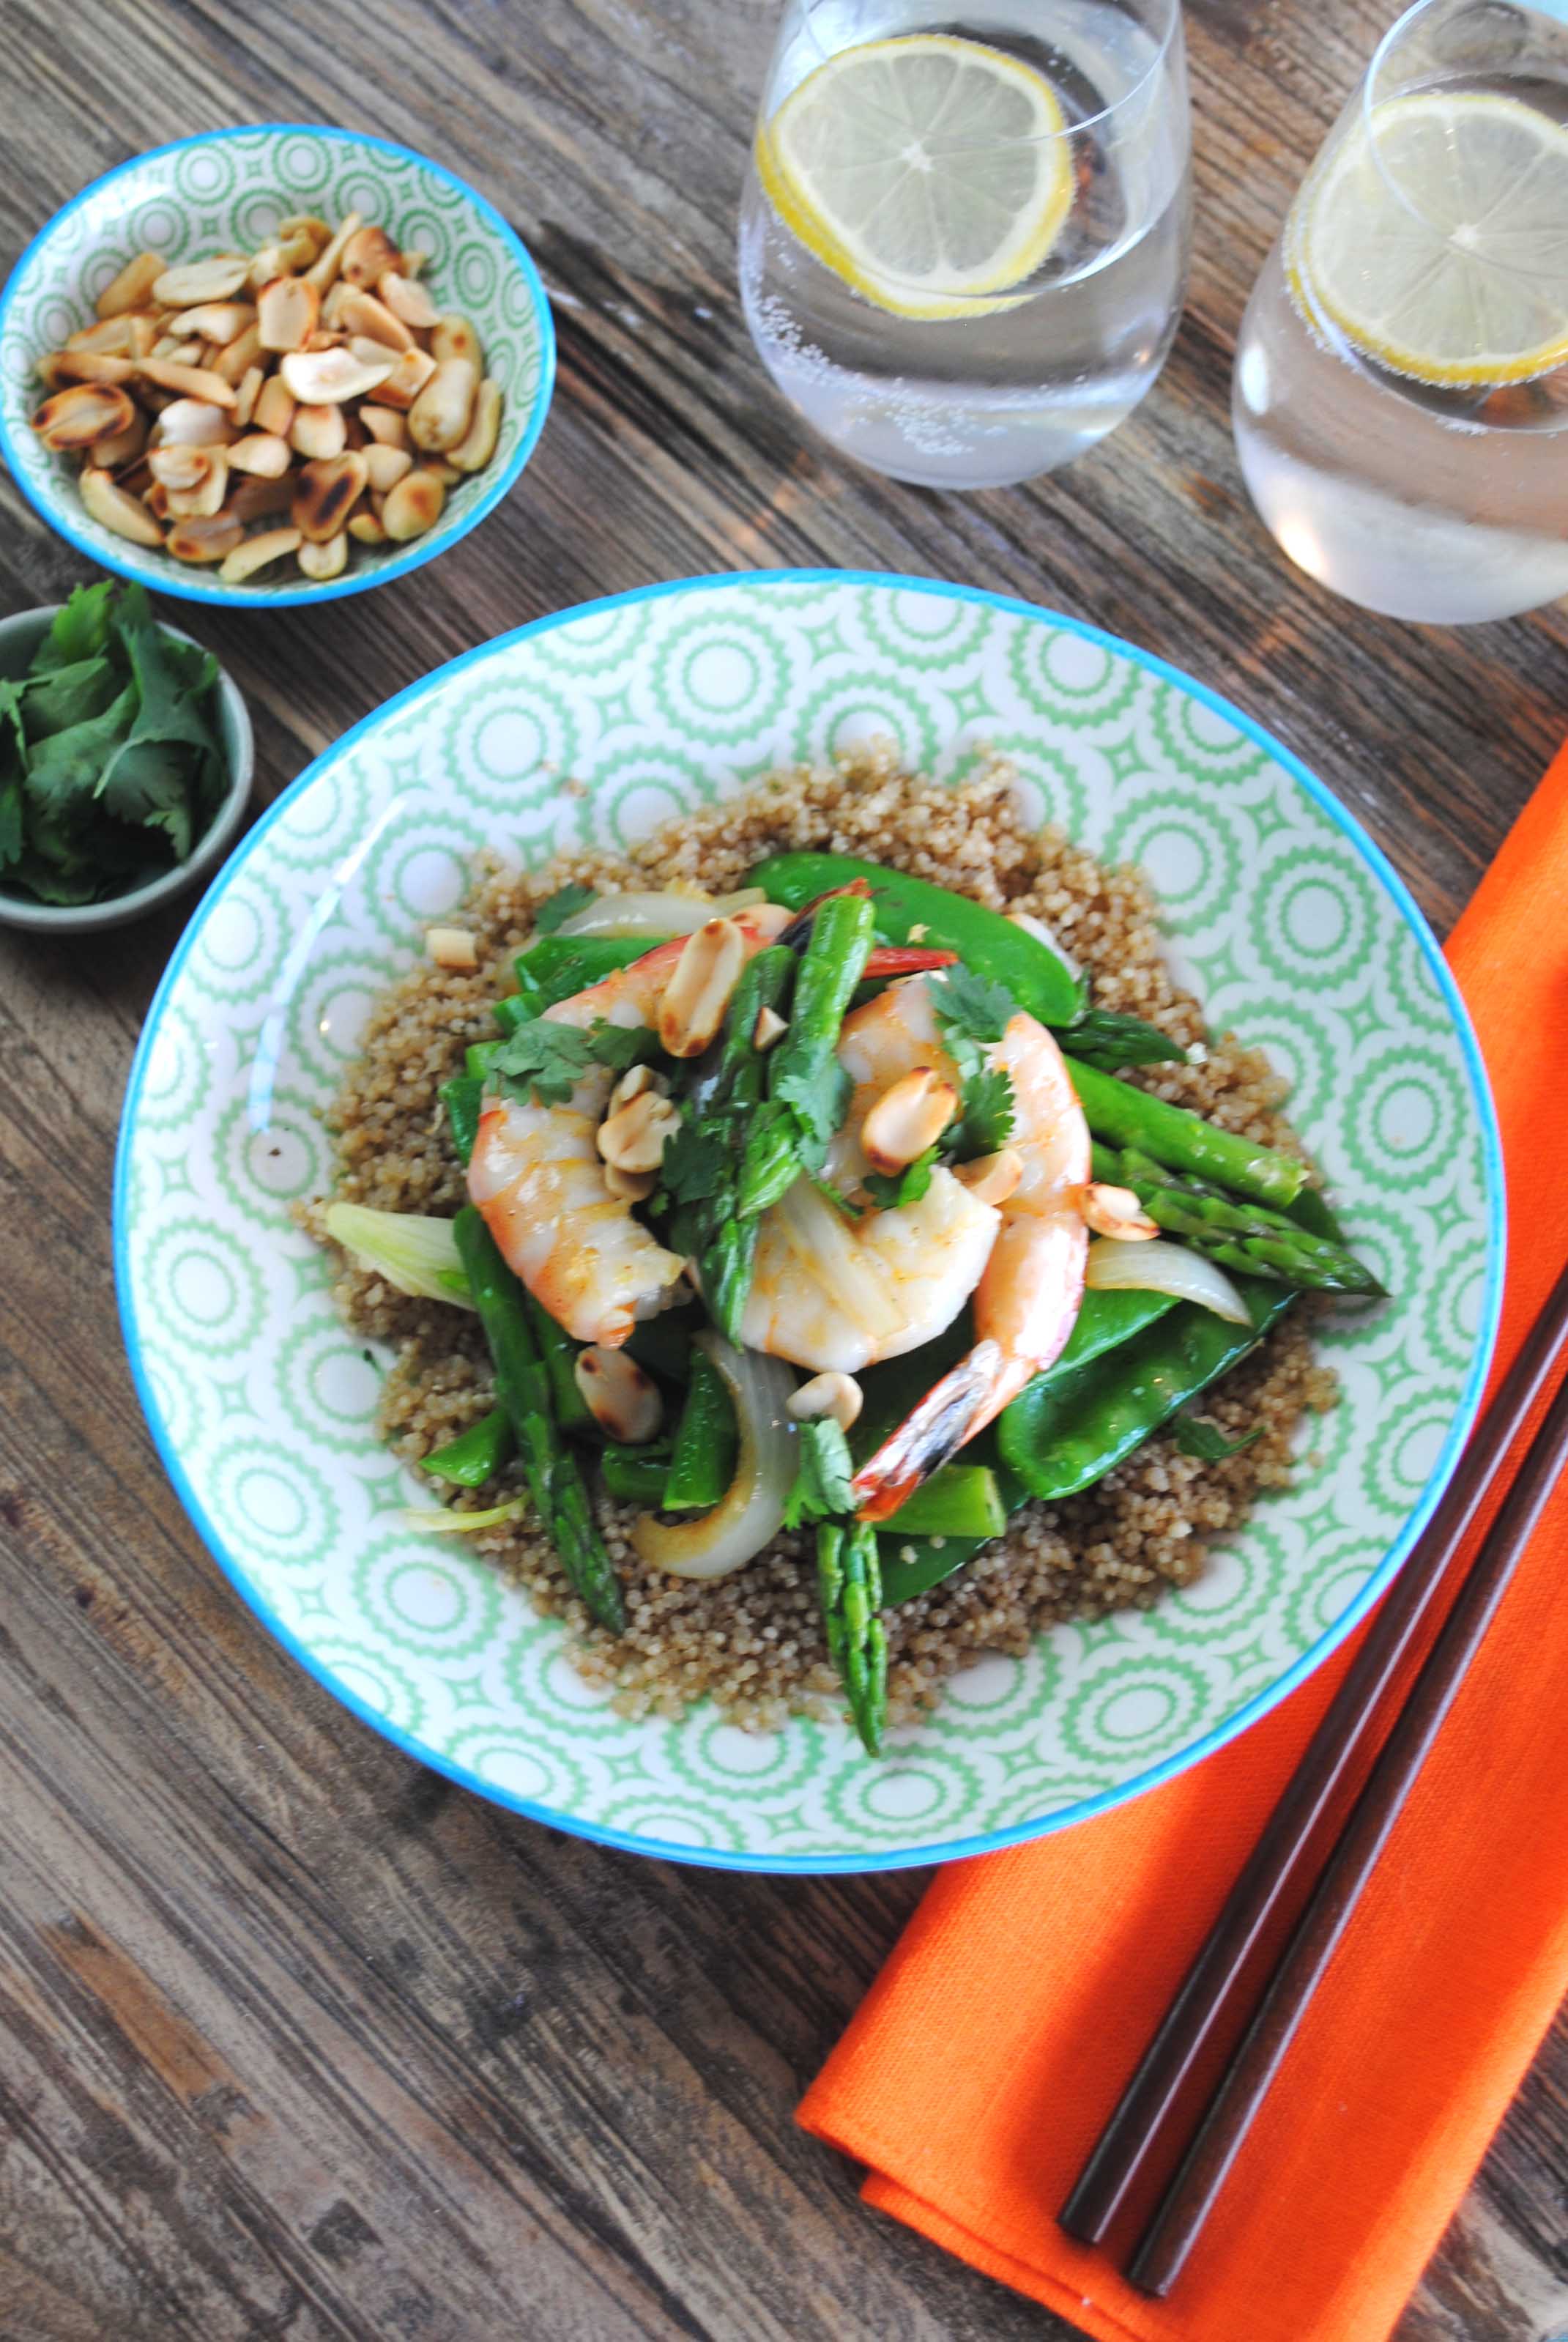 Stir-fried prawns and asparagus - Catherine Saxelby's Foodwatch